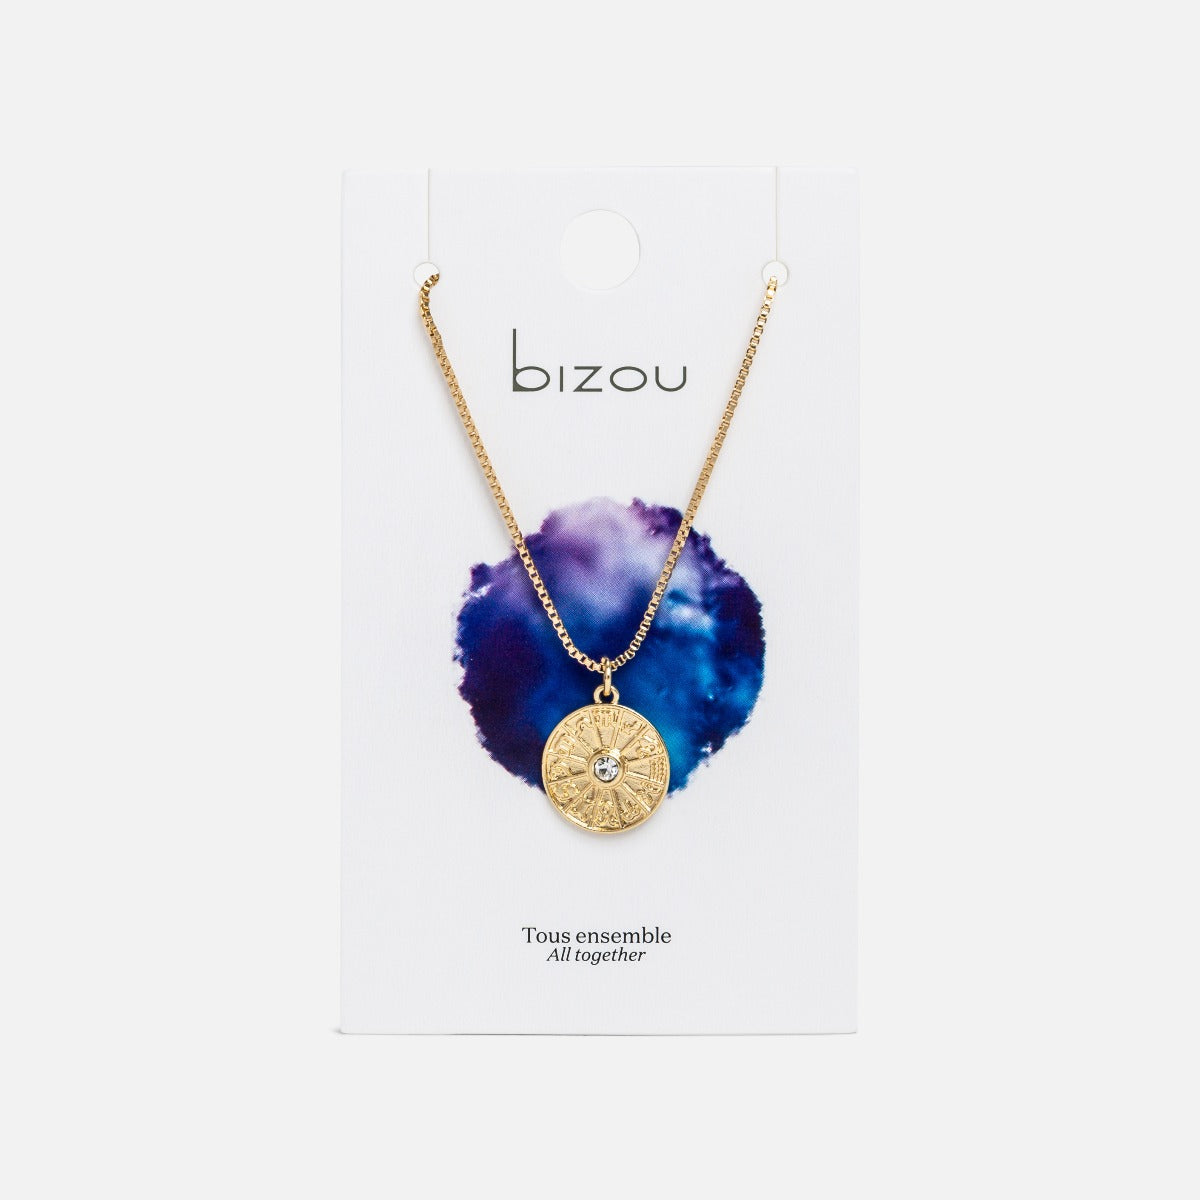 Golden necklace with 12 zodiac signs charm